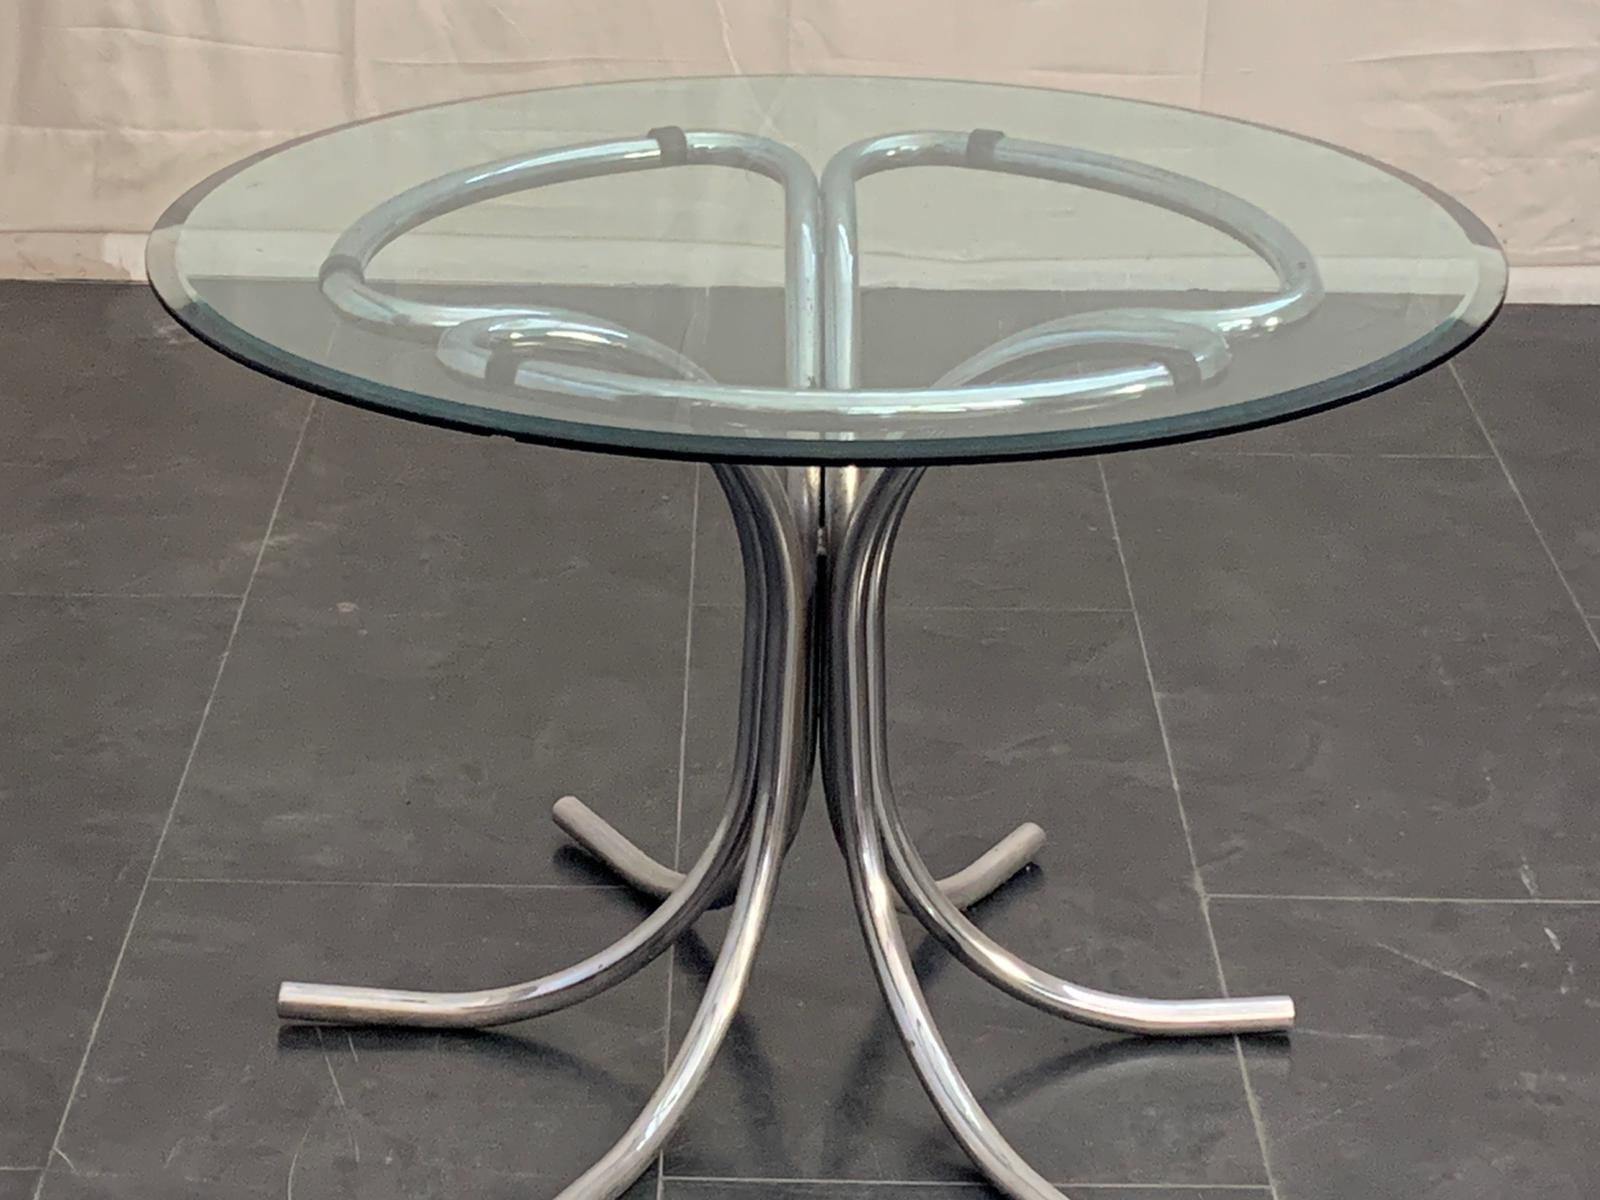 Table with tubular steel base and circular glass top, 1960s.
Circular glass top missing
Packaging with bubble wrap and cardboard boxes is included. If the wooden packaging is needed (fumigated crates or boxes) for US and International Shipping, it's